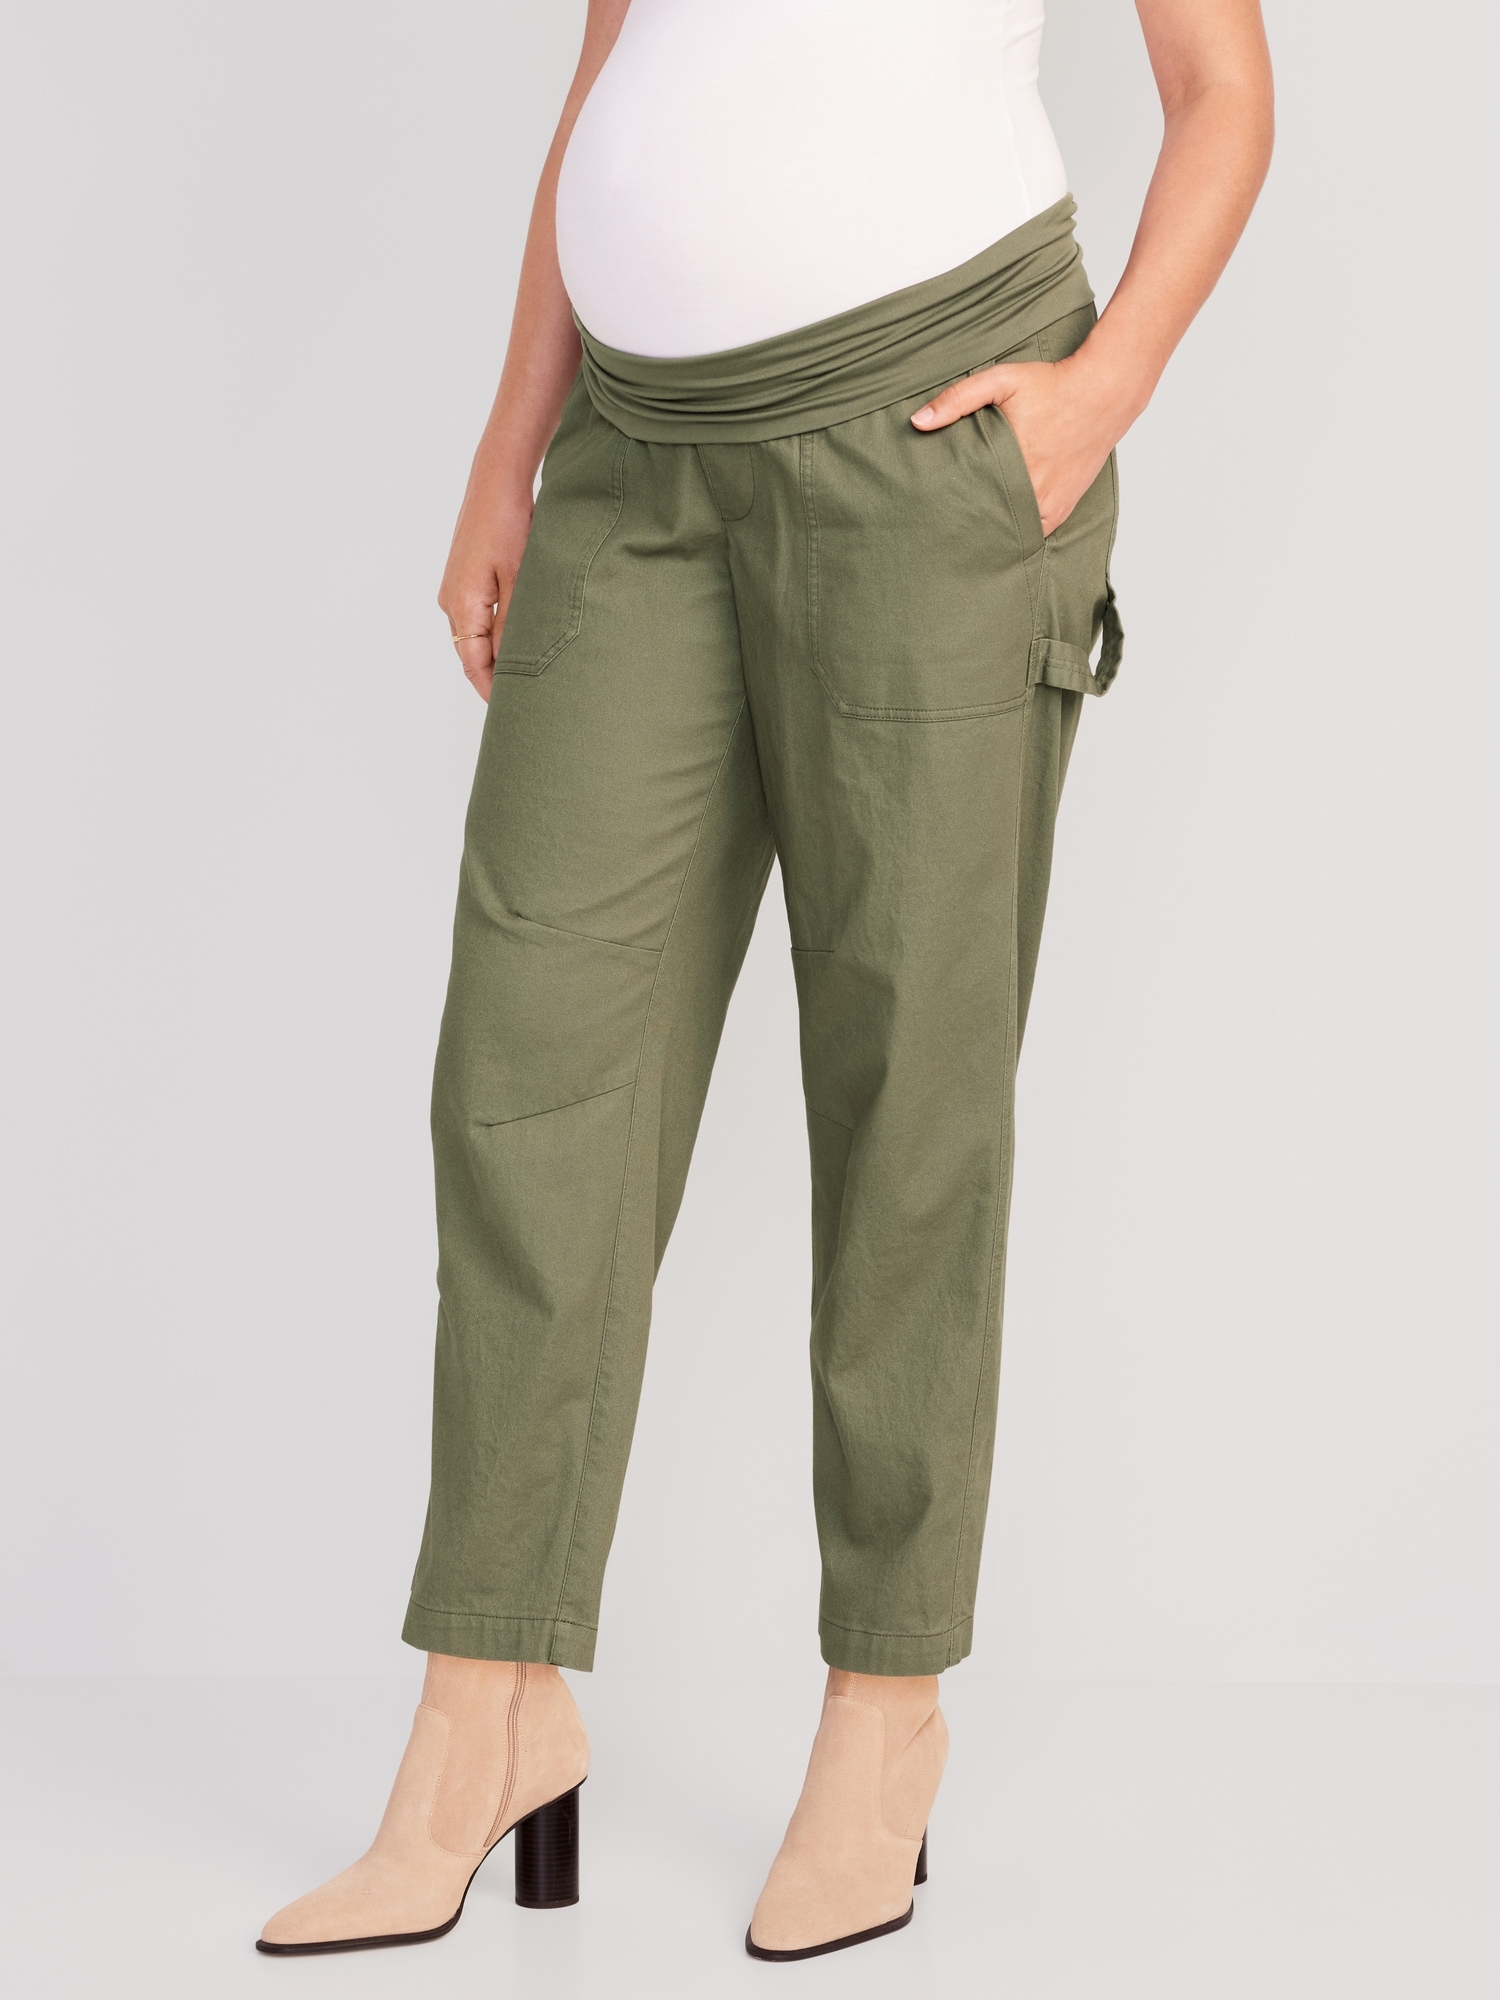 Oh Baby By Motherhood Solid Gray Tan Cargo Pants Size M (Maternity) - 56%  off